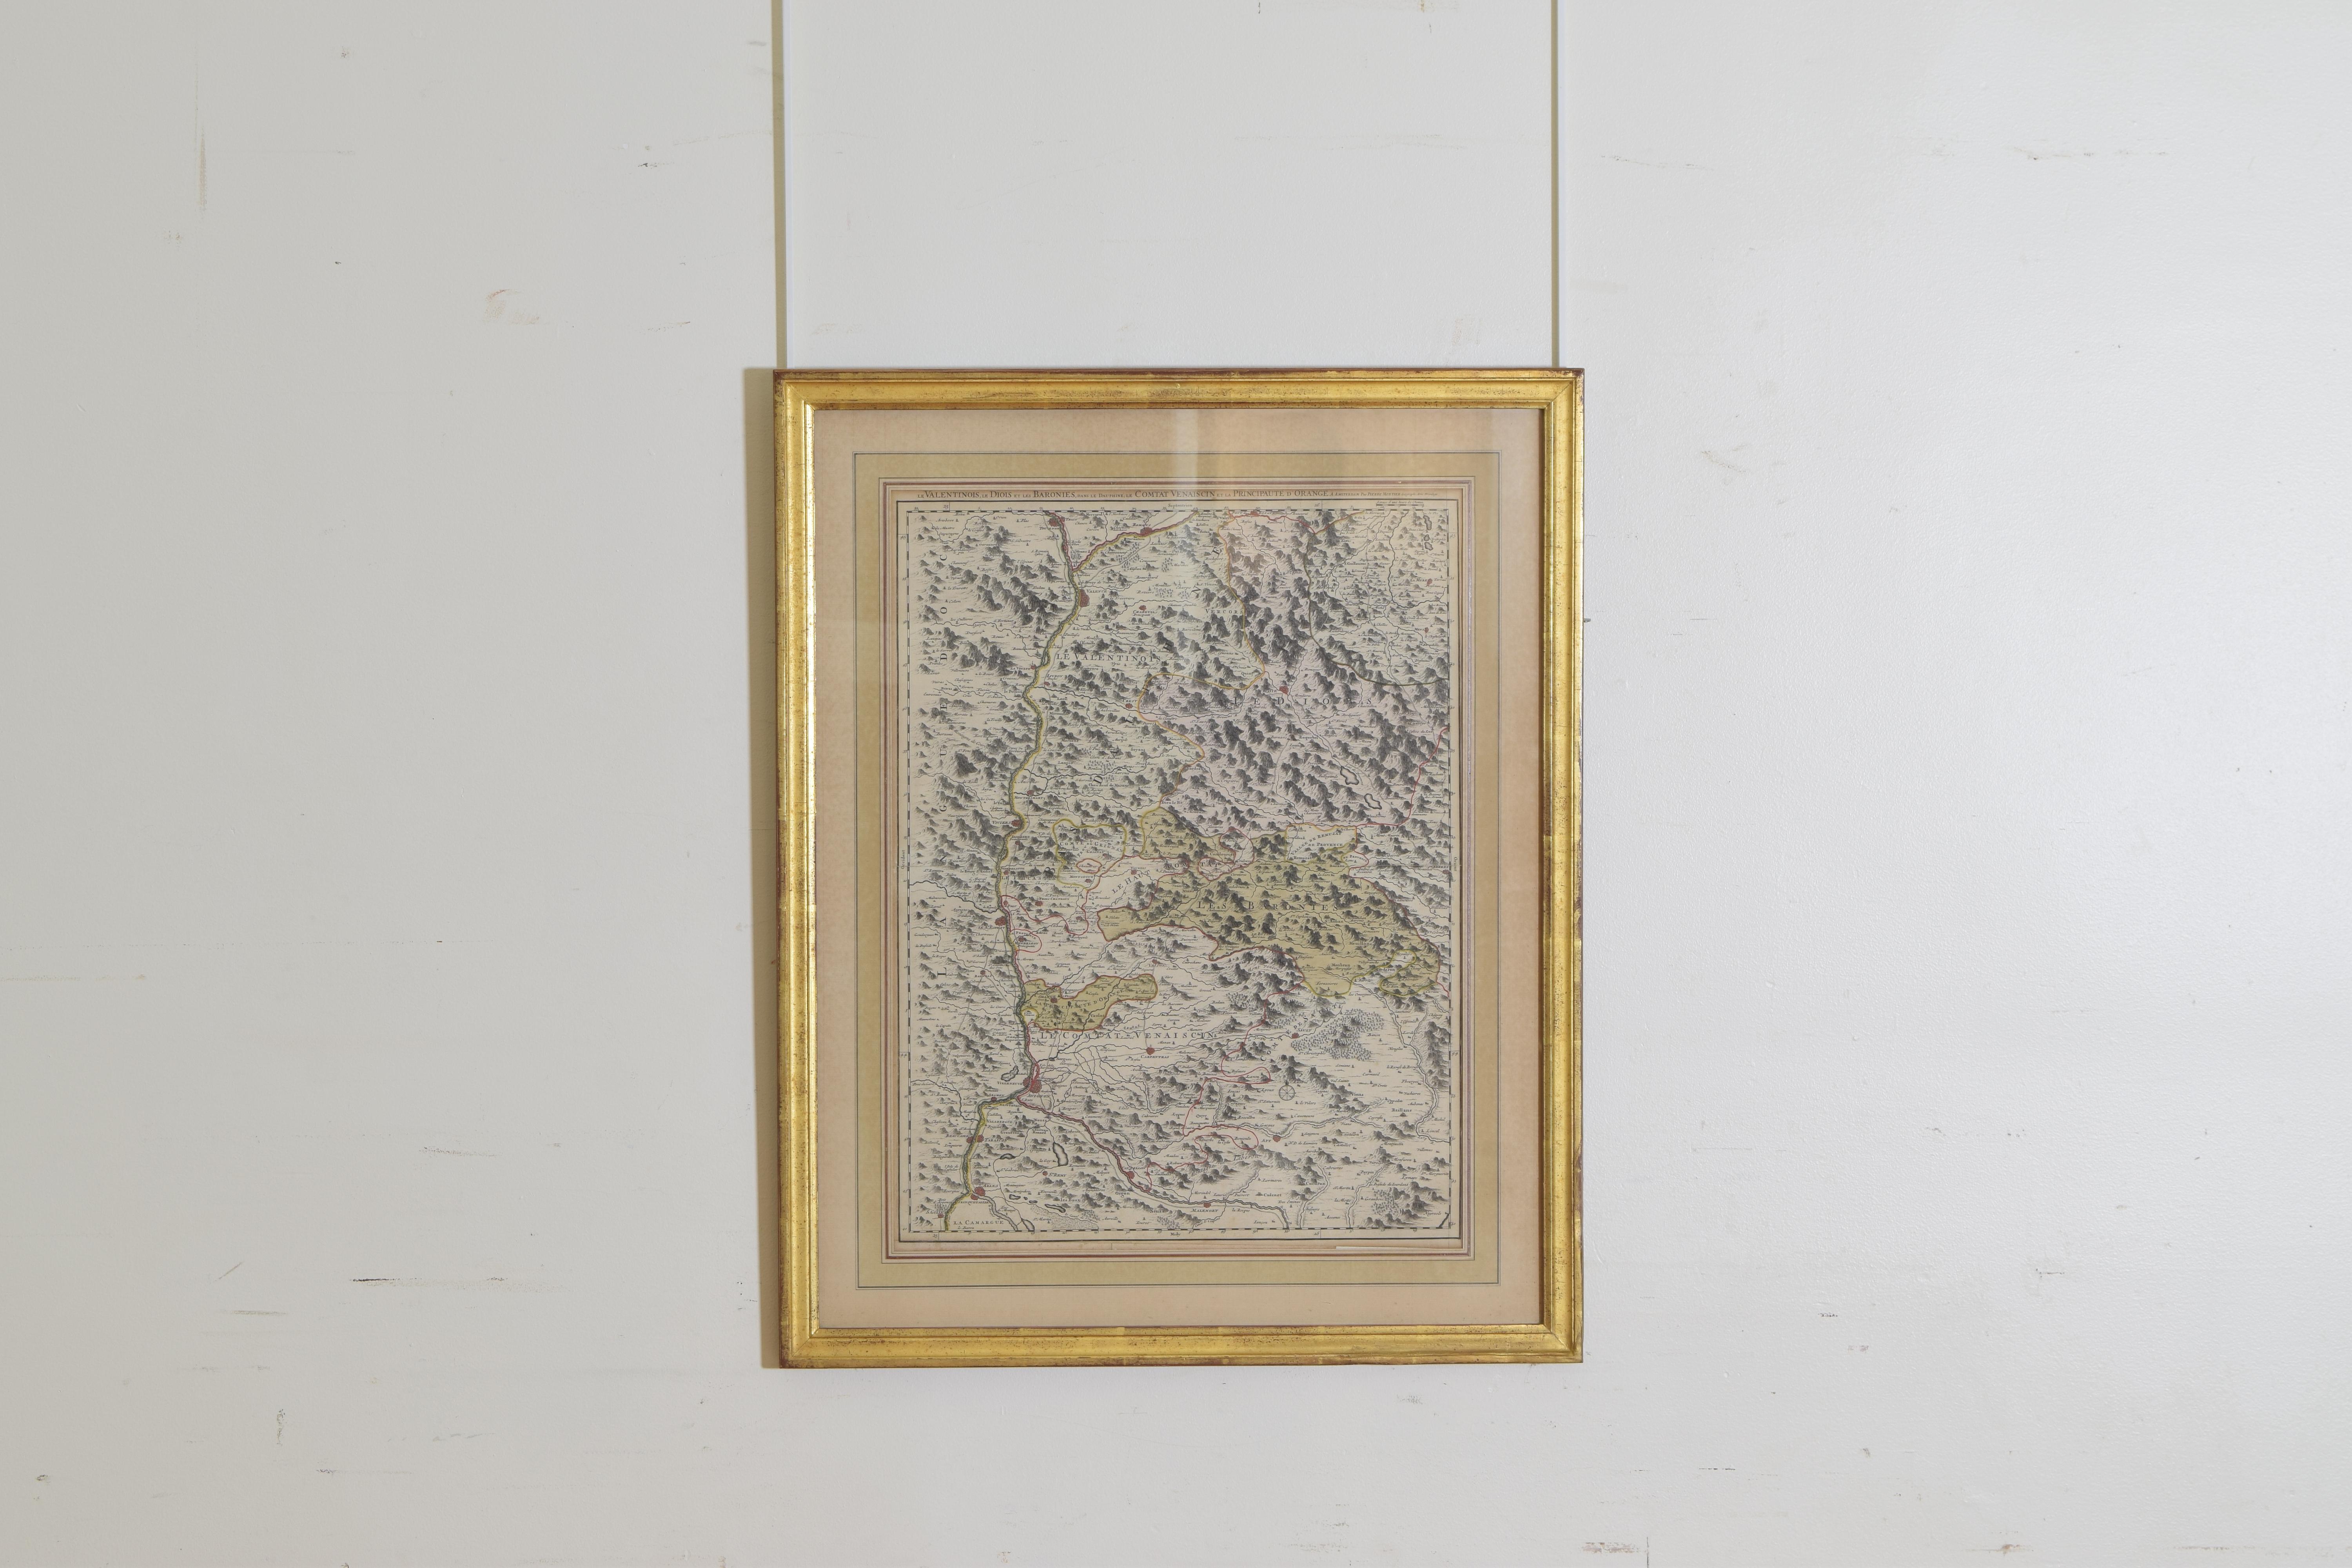 A beautifully hand colored engraving in a later, 19th century, giltwood and gilt gesso frame, hand colored mat, the map showing in great detail sections of Provence, and in French, Le Valentinois, Le Diois et les Baronies, dans le Dauphine, le